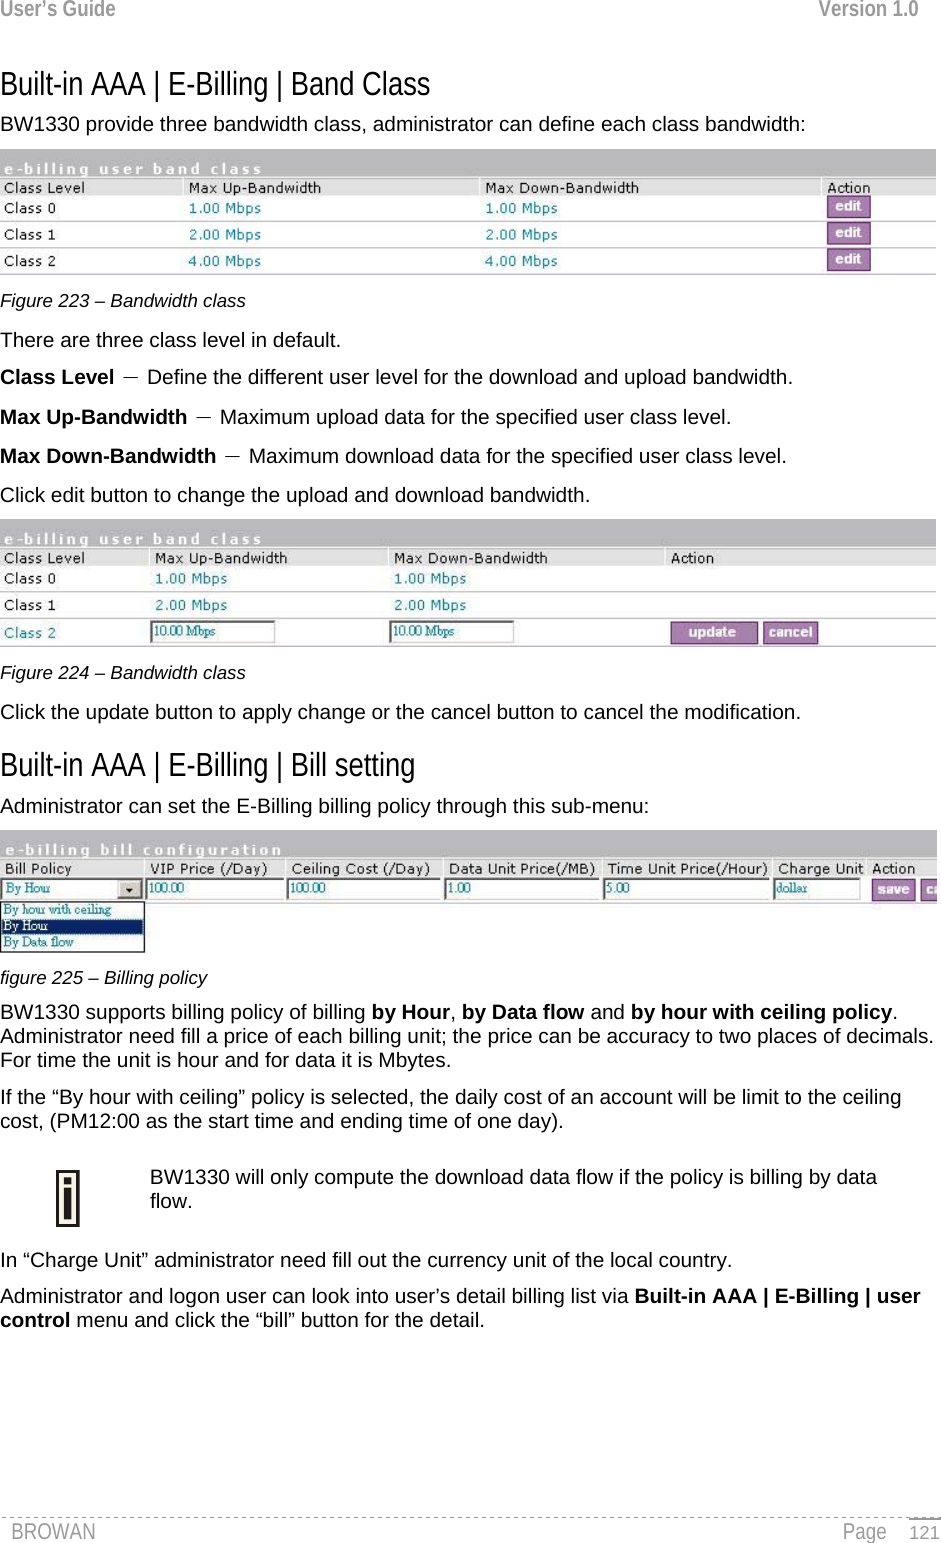 User’s Guide  Version 1.0  Built-in AAA | E-Billing | Band Class BW1330 provide three bandwidth class, administrator can define each class bandwidth:  Figure 223 – Bandwidth class There are three class level in default. Class Level － Define the different user level for the download and upload bandwidth. Max Up-Bandwidth － Maximum upload data for the specified user class level. Max Down-Bandwidth － Maximum download data for the specified user class level. Click edit button to change the upload and download bandwidth.  Figure 224 – Bandwidth class Click the update button to apply change or the cancel button to cancel the modification. Built-in AAA | E-Billing | Bill setting Administrator can set the E-Billing billing policy through this sub-menu:  figure 225 – Billing policy BW1330 supports billing policy of billing by Hour, by Data flow and by hour with ceiling policy. Administrator need fill a price of each billing unit; the price can be accuracy to two places of decimals. For time the unit is hour and for data it is Mbytes. If the “By hour with ceiling” policy is selected, the daily cost of an account will be limit to the ceiling cost, (PM12:00 as the start time and ending time of one day). BW1330 will only compute the download data flow if the policy is billing by data flow.  In “Charge Unit” administrator need fill out the currency unit of the local country. Administrator and logon user can look into user’s detail billing list via Built-in AAA | E-Billing | user control menu and click the “bill” button for the detail. BROWAN                                                                                                                                               Page   121